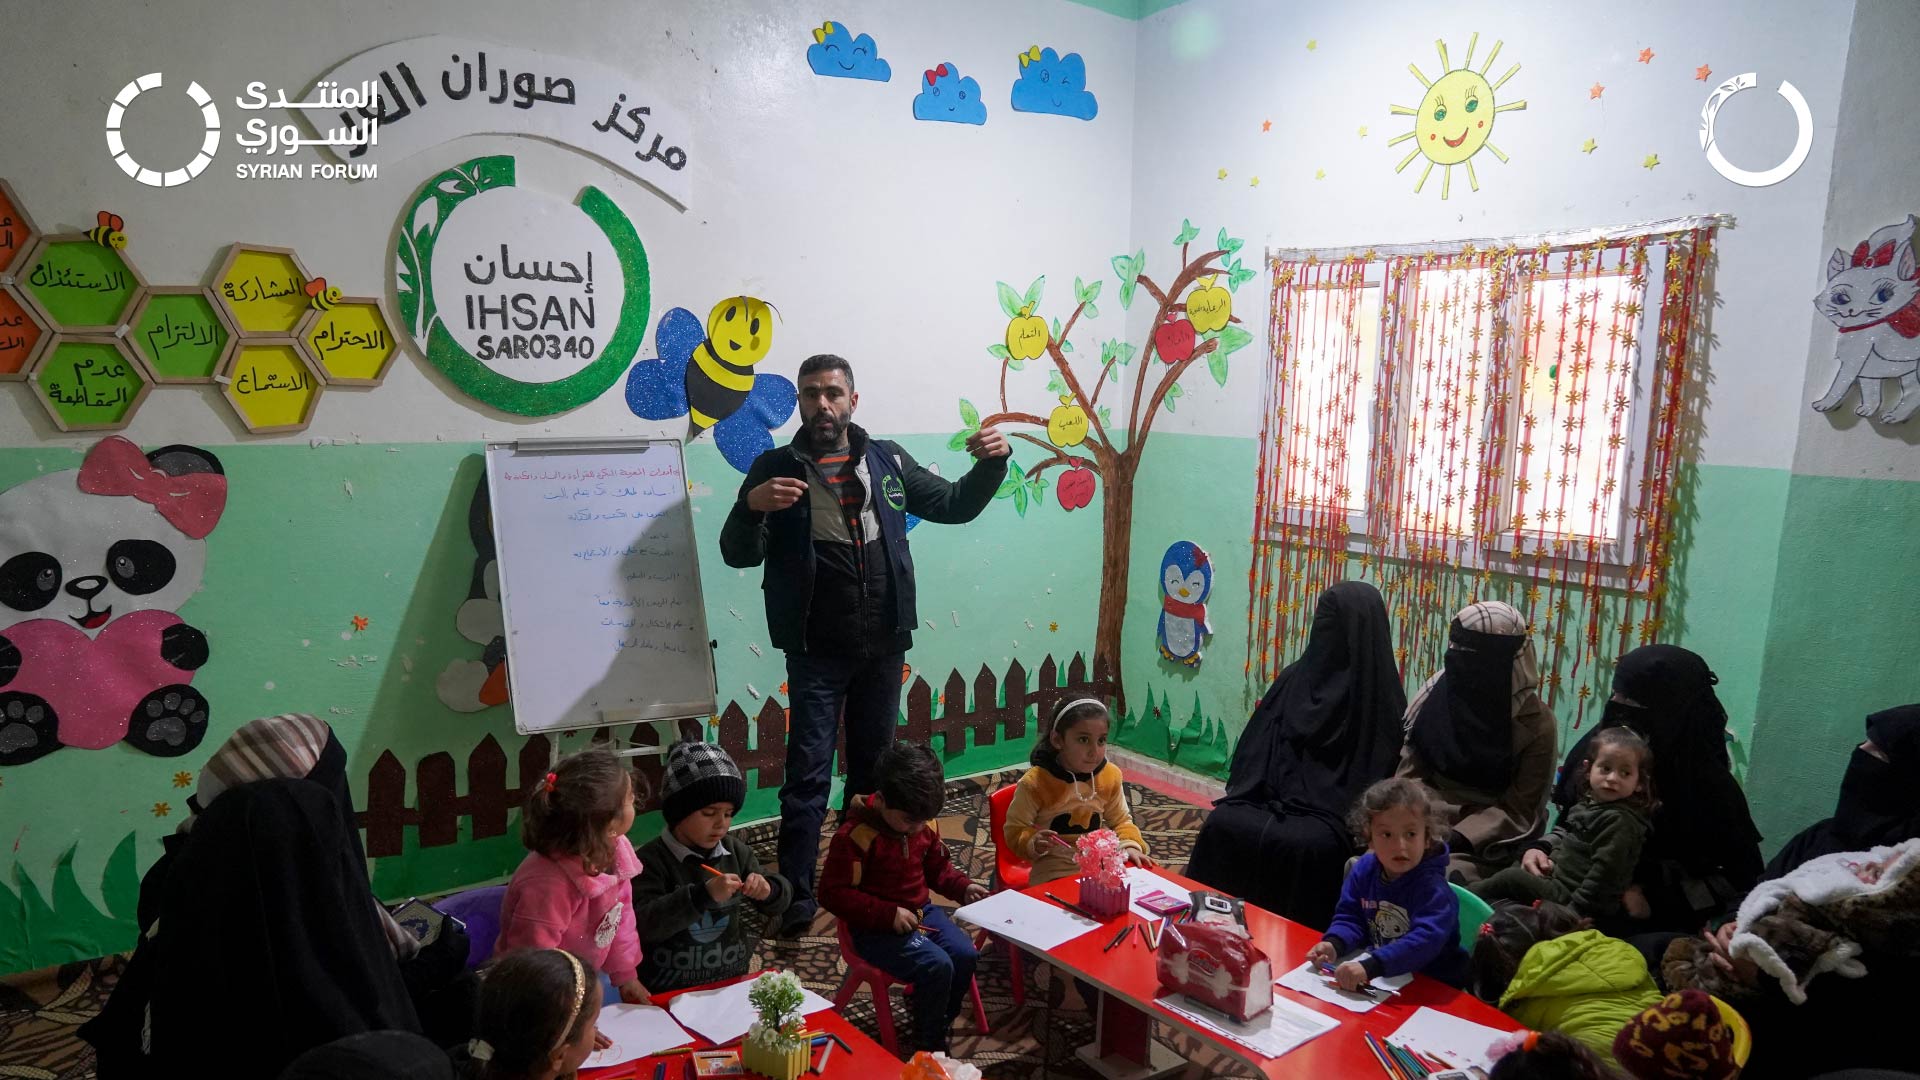 (English) Training mothers in parenting skills in northwest Syria